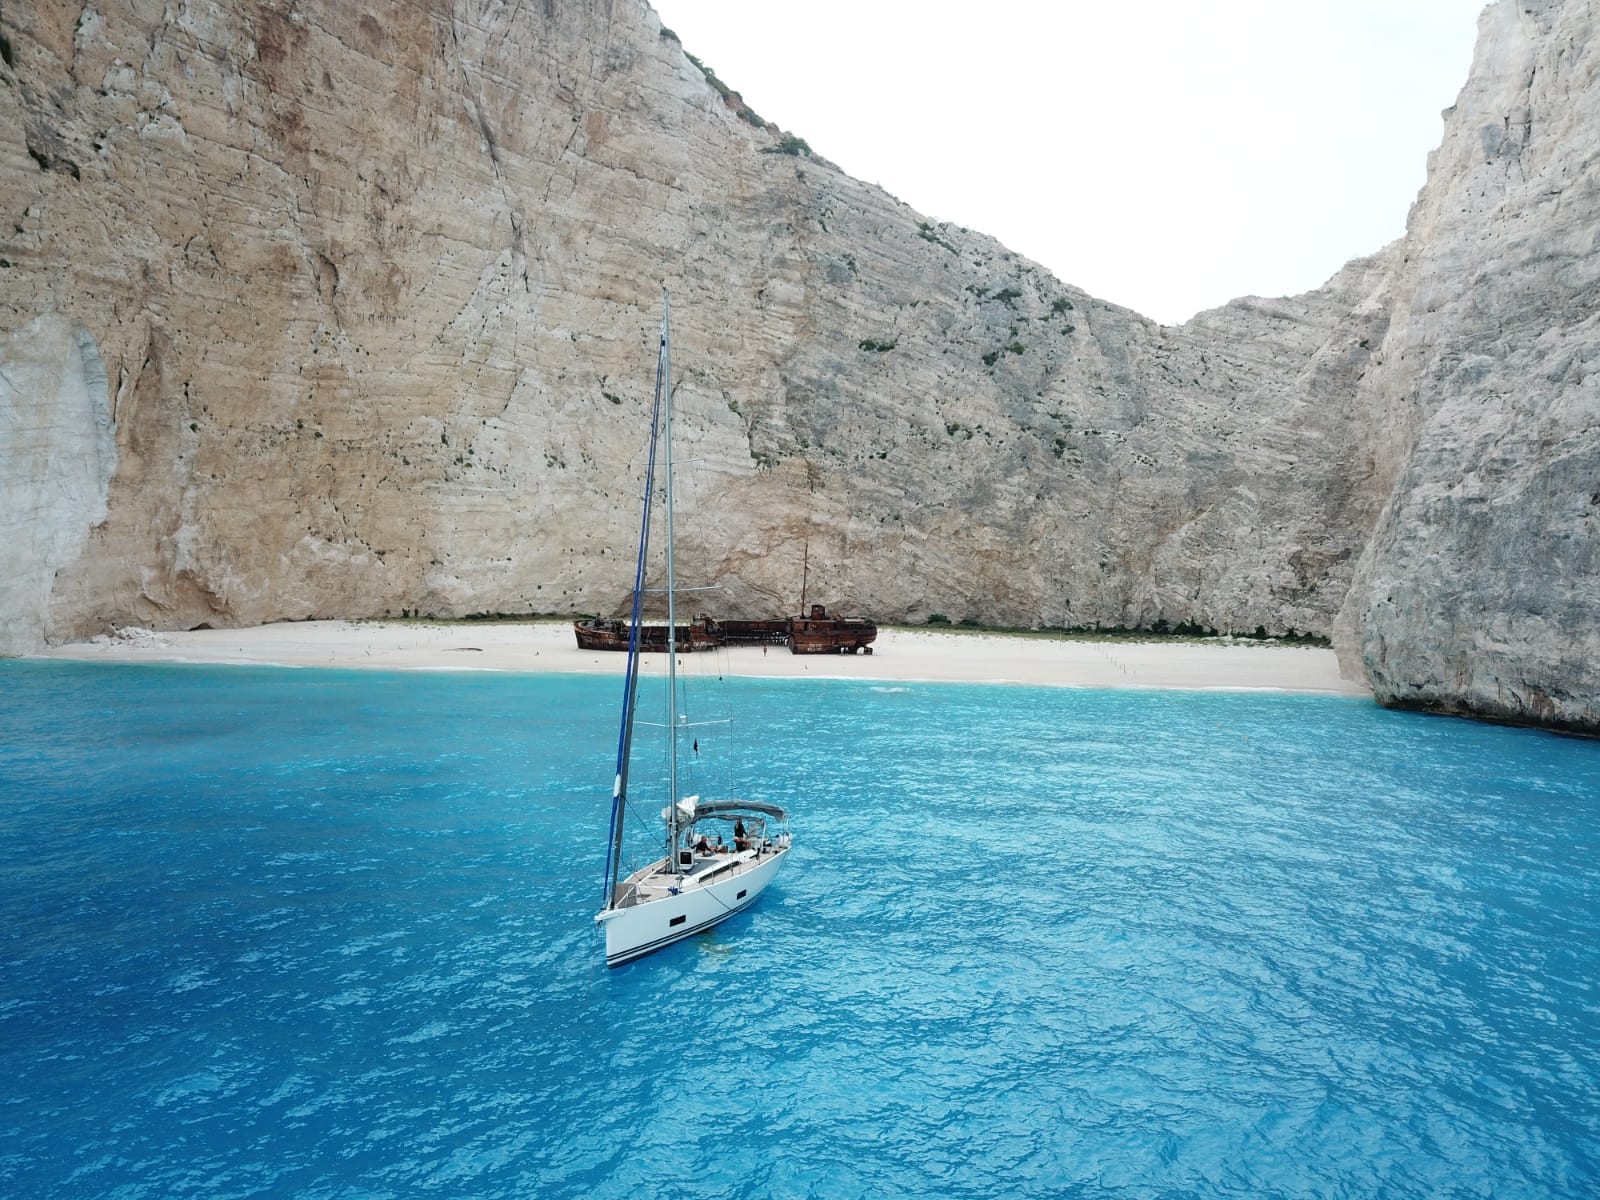 A small boat sailing on the Greek waters